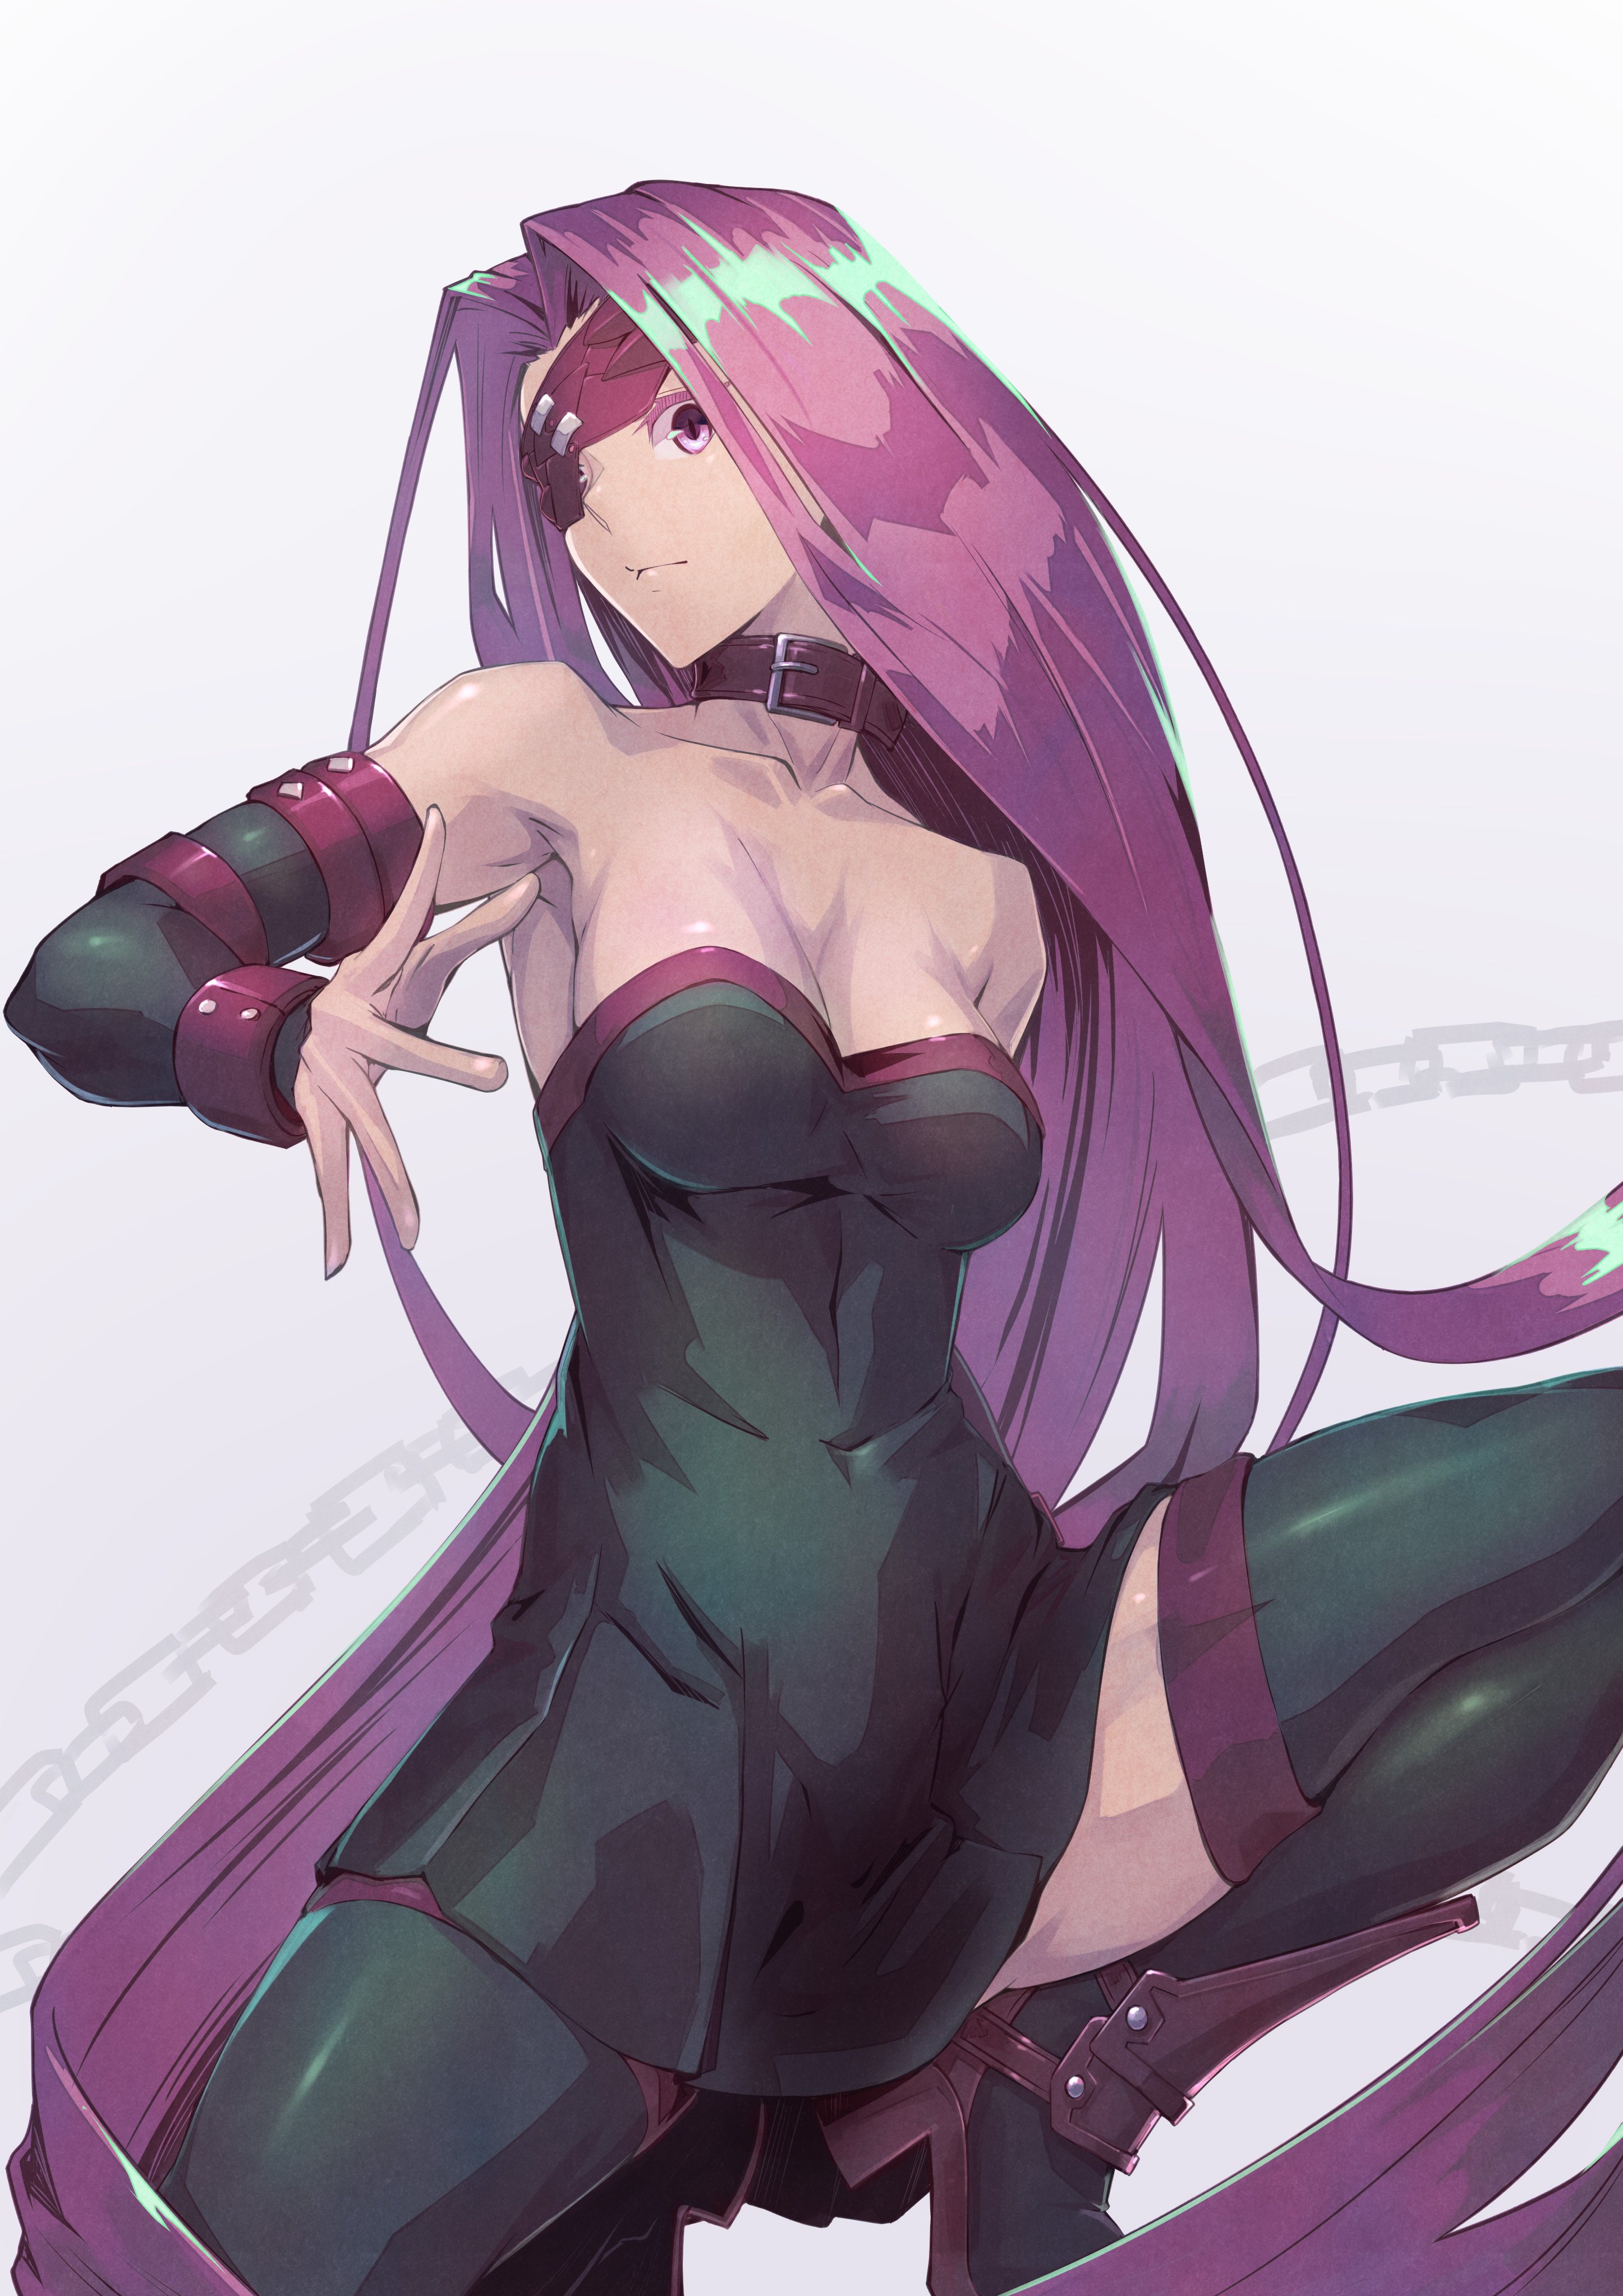 Anime 2893x4093 Fate series Fate/Stay Night fate/stay night: heaven's feel 2D thighs big boobs ecchi long hair female warrior cleavage black dress black thigh-highs thigh high boots blindfold purple hair smiling Rider (Fate/Stay Night) curvy portrait display purple eyes chains simple background fan art looking at viewer